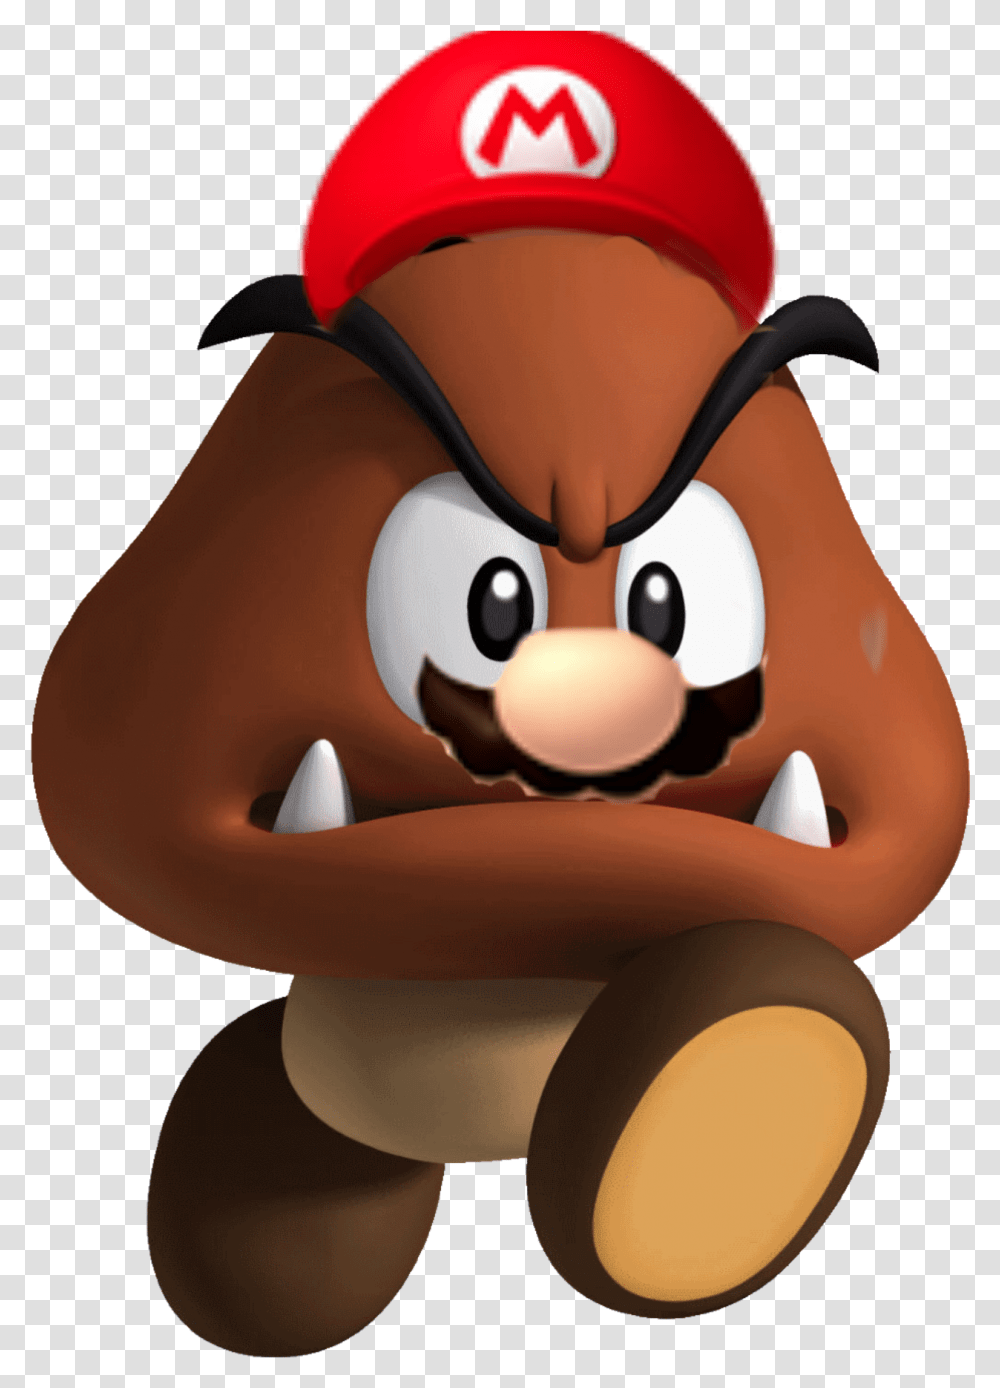 Unanything Wiki Mario Goomba, Toy, Helmet, Apparel Transparent Png